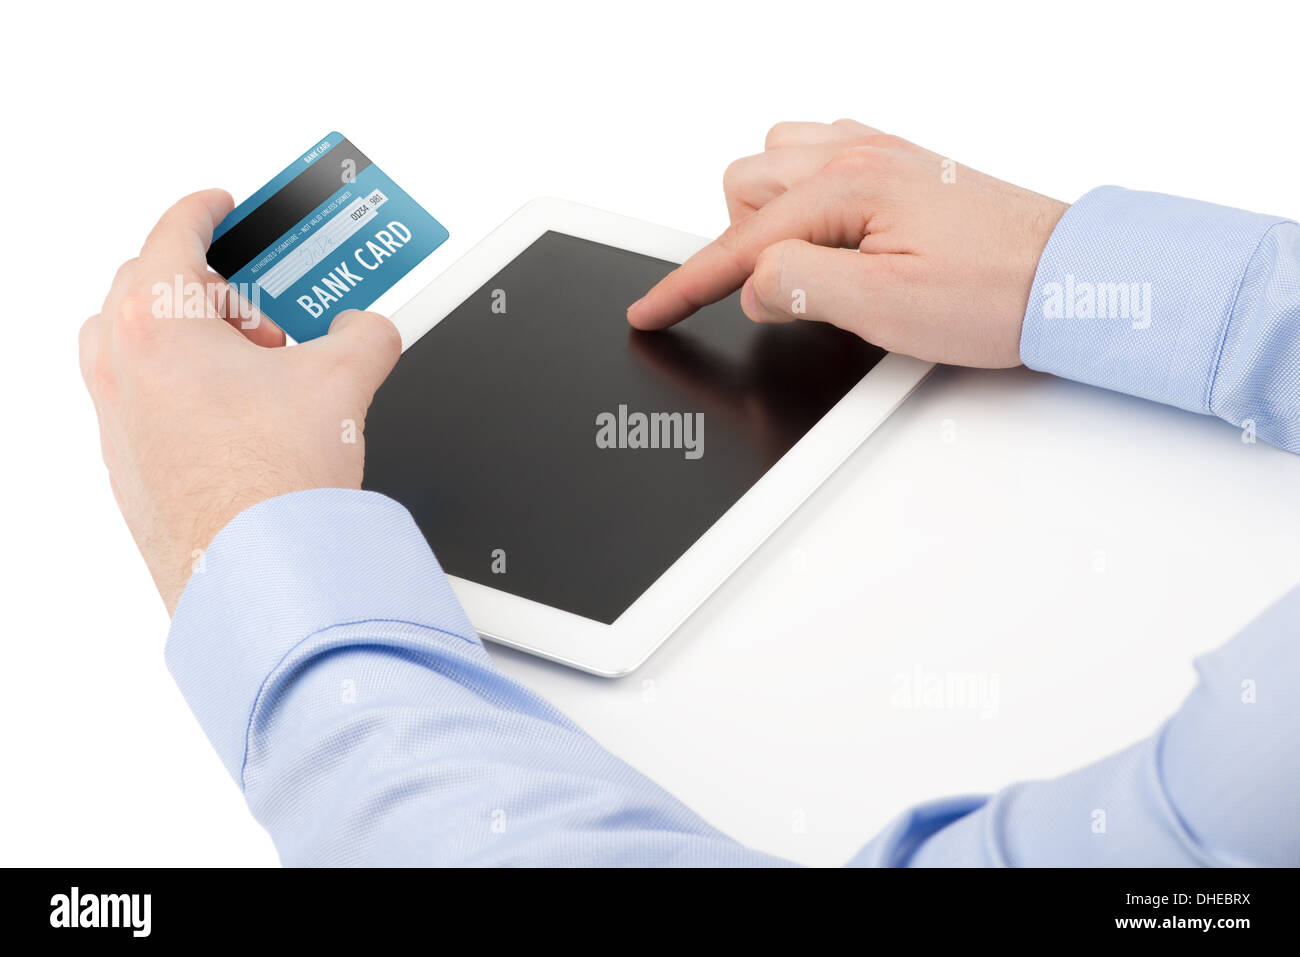 Man's hand holding a credit card over a tablet computer and the other hand touching the screen on a white background. Stock Photo